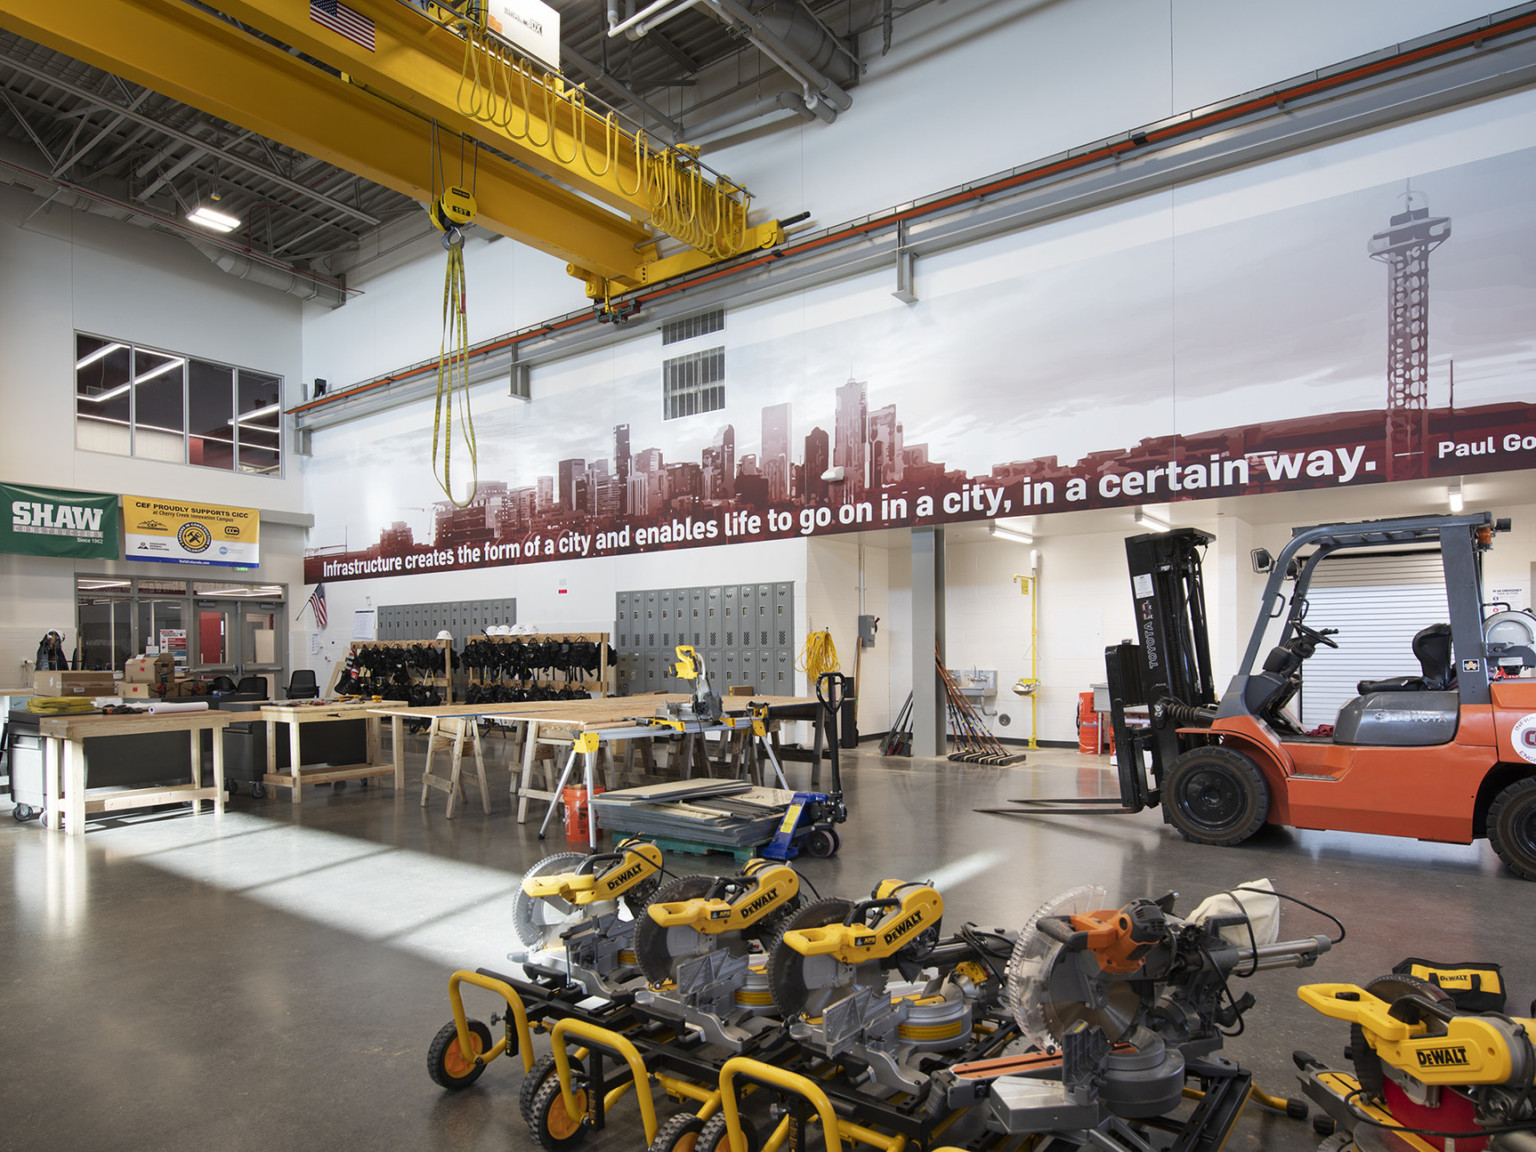 Double height mechanical lab with forklift to back right. Mural above with quote on infrastructure. Rows of wood tables, left